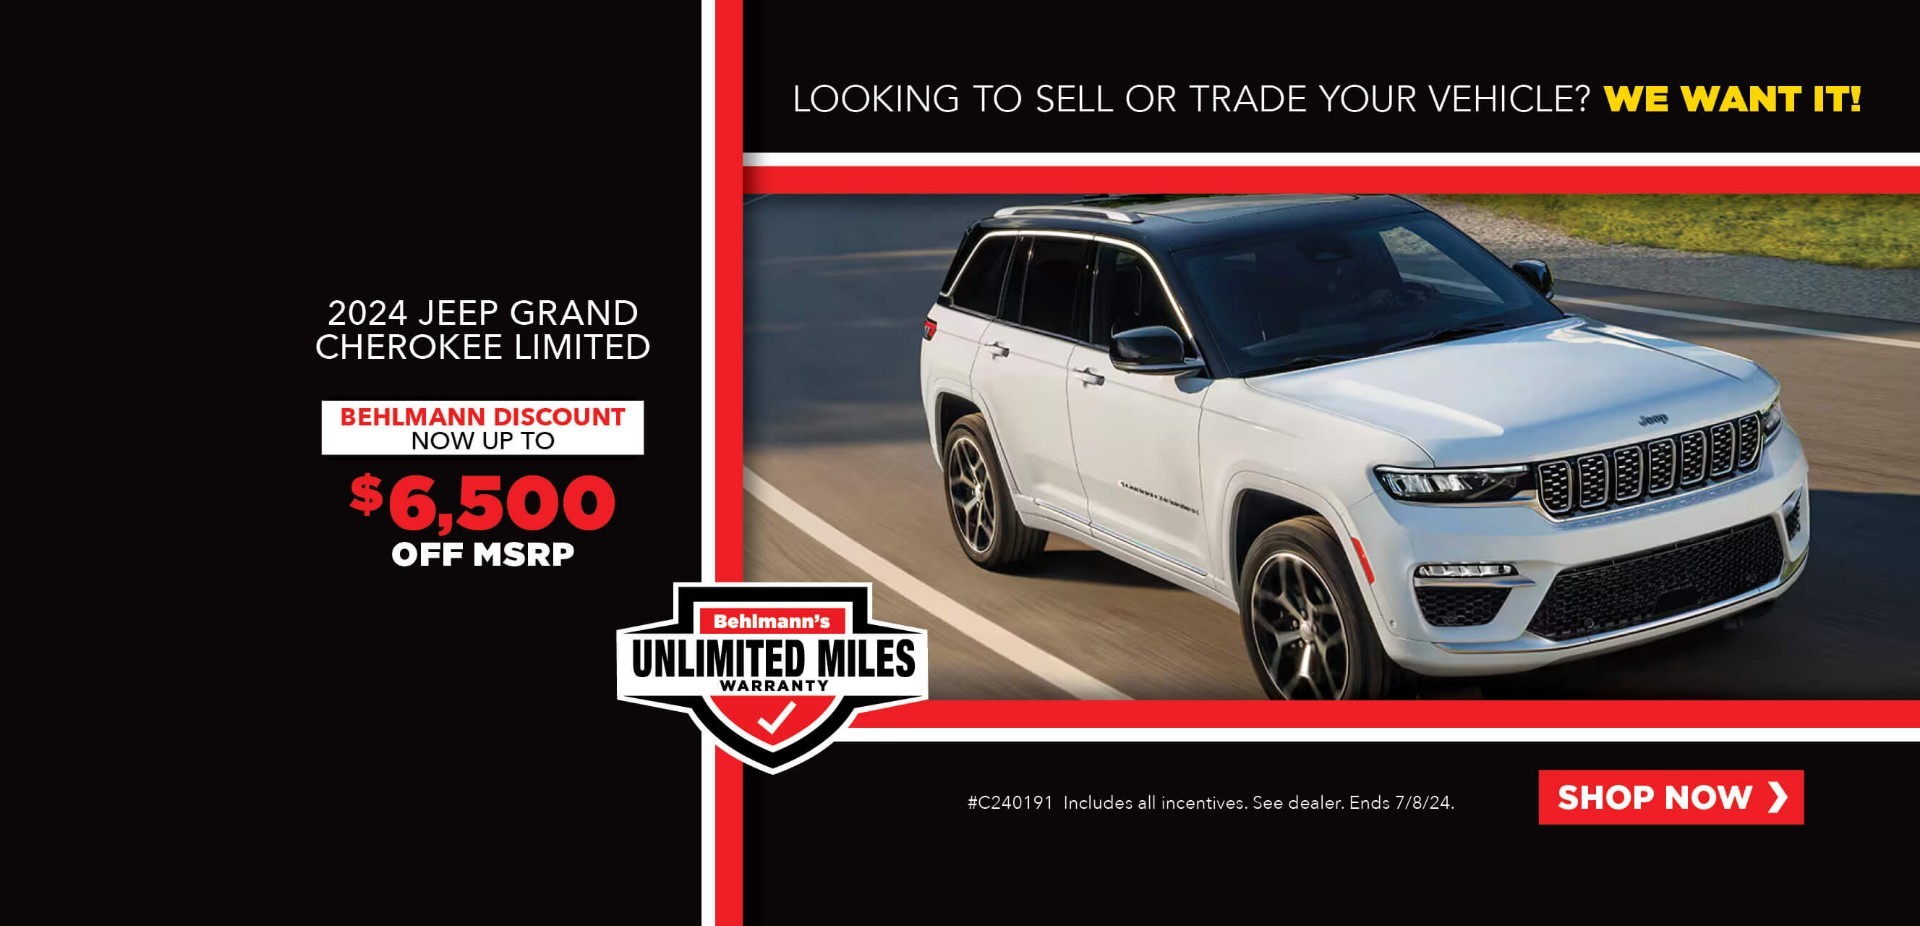 White SUV with advertising slogans: Behlmann Discount - Now up to $6,500 off MSRP on 2024 Jeep Grand Cherokee